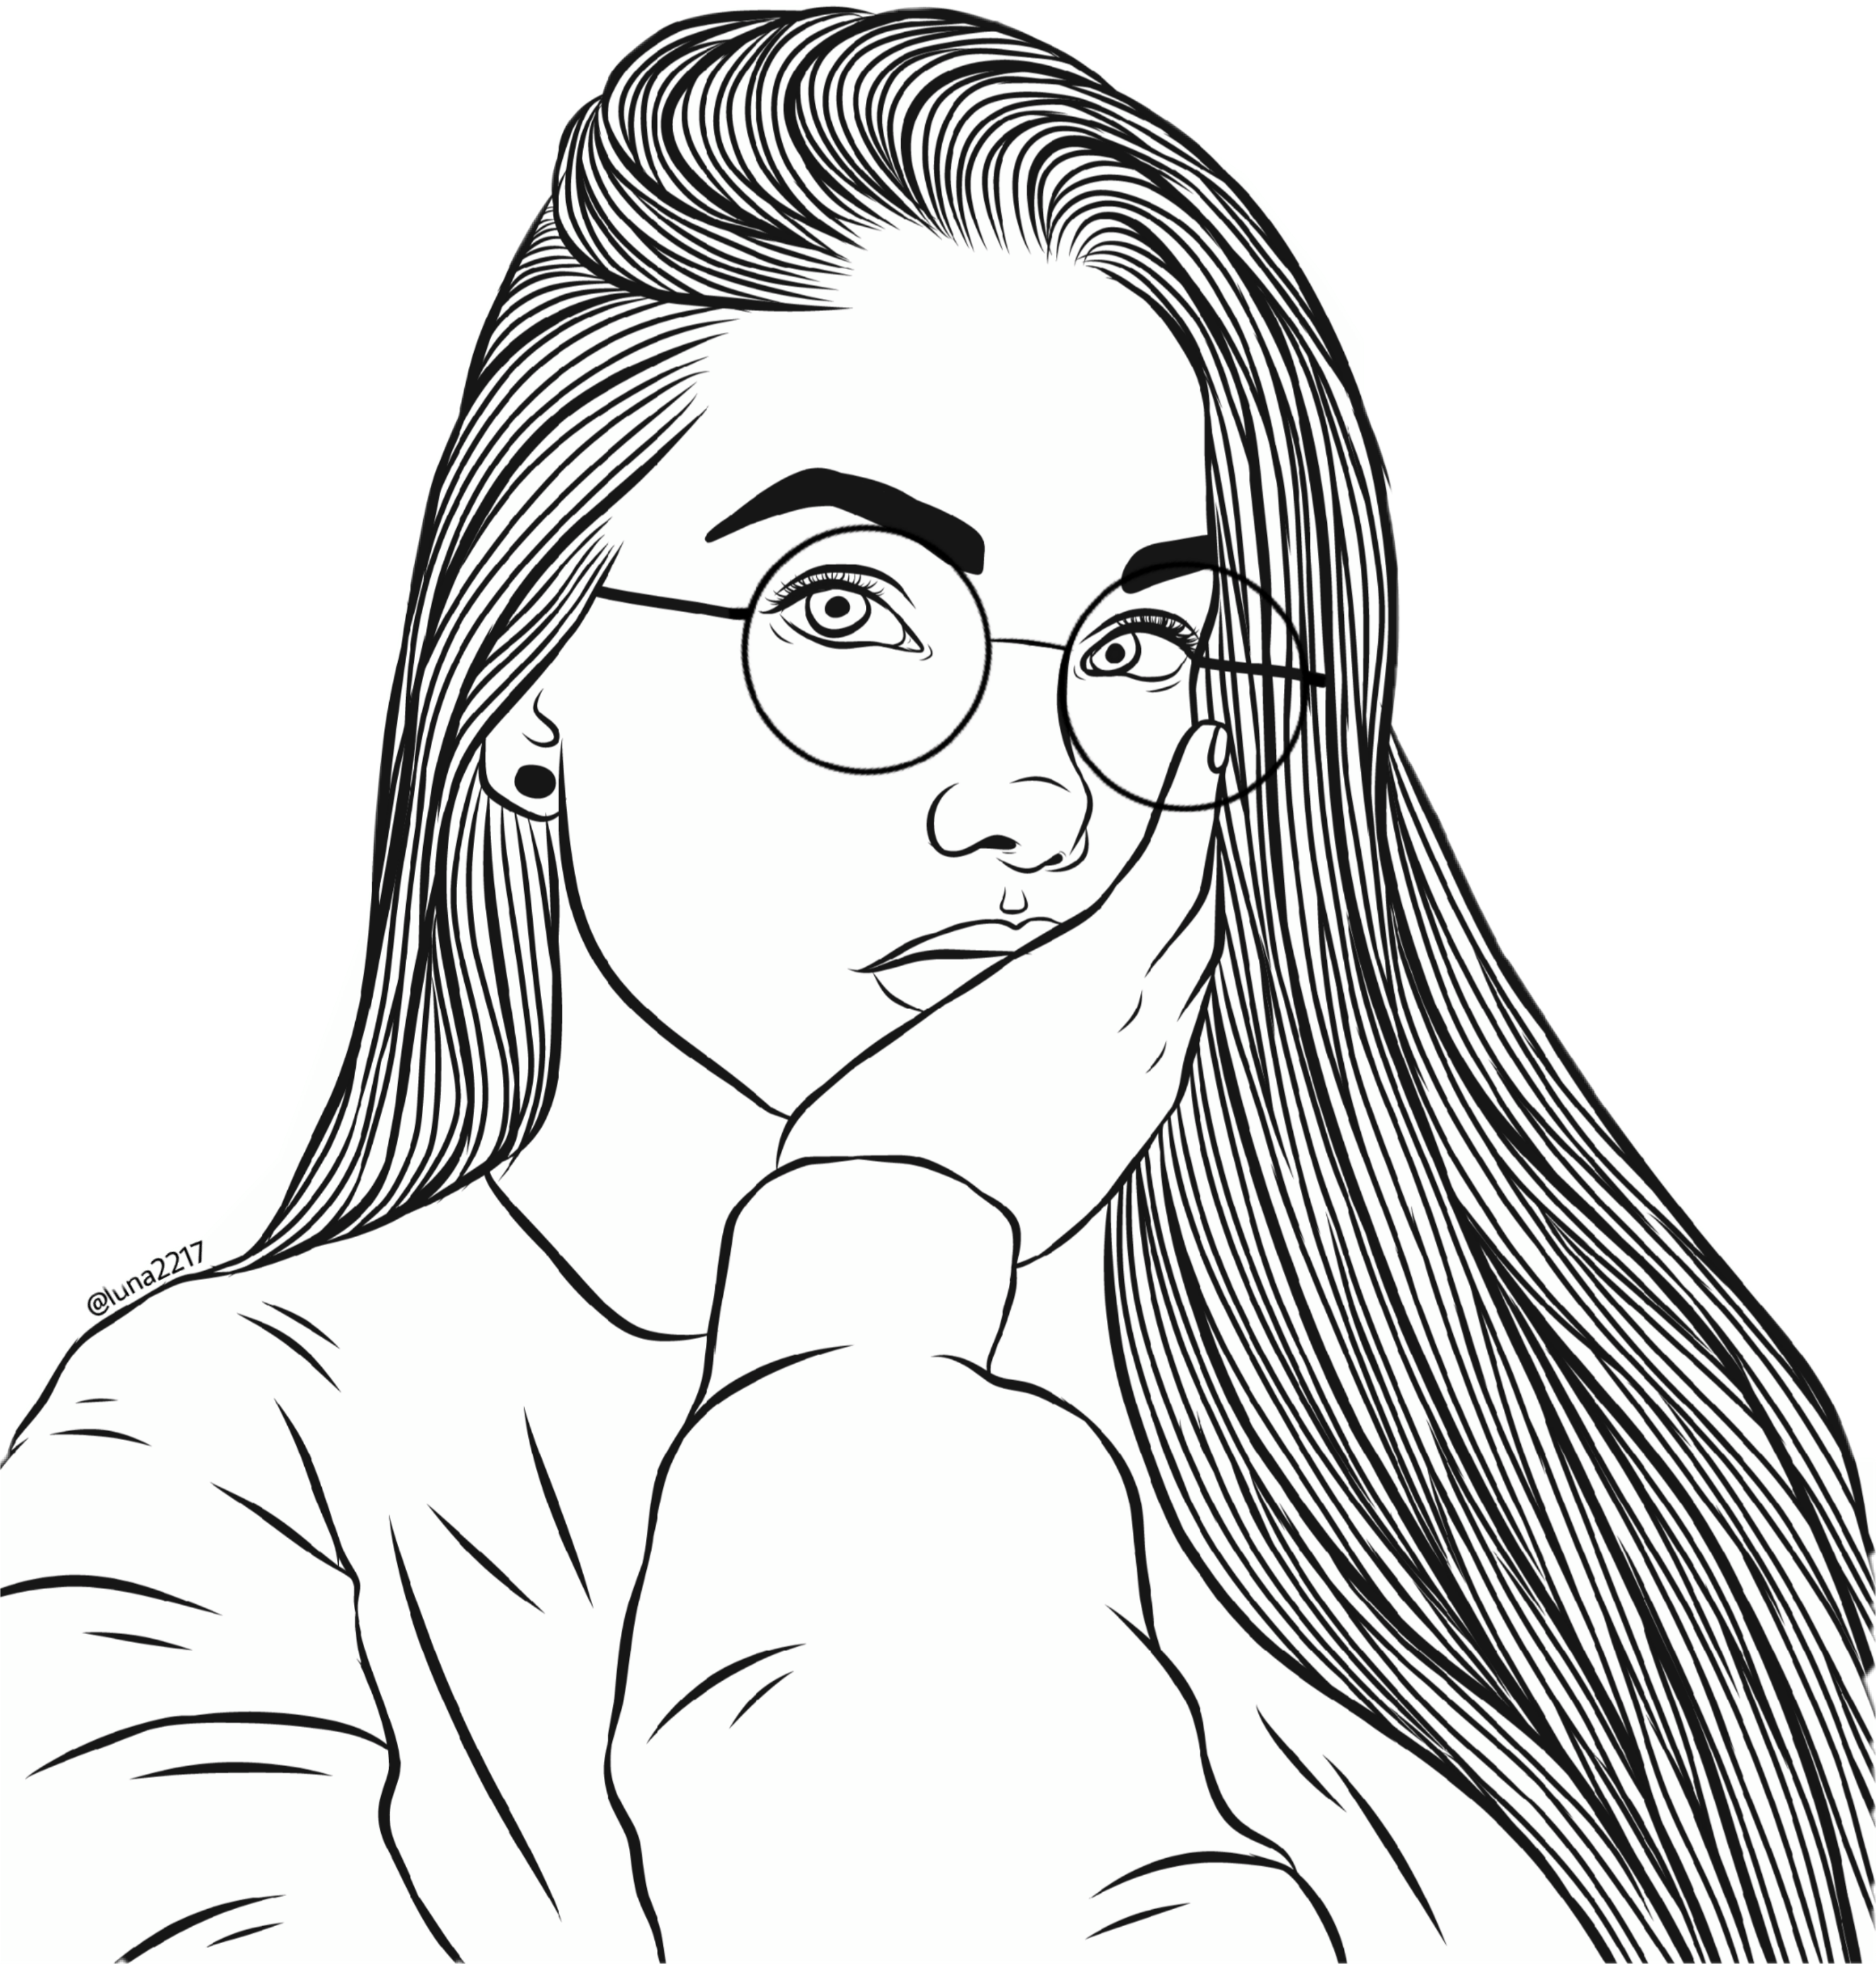 Anime Girl With Glasses Coloring Page - MAXIPX